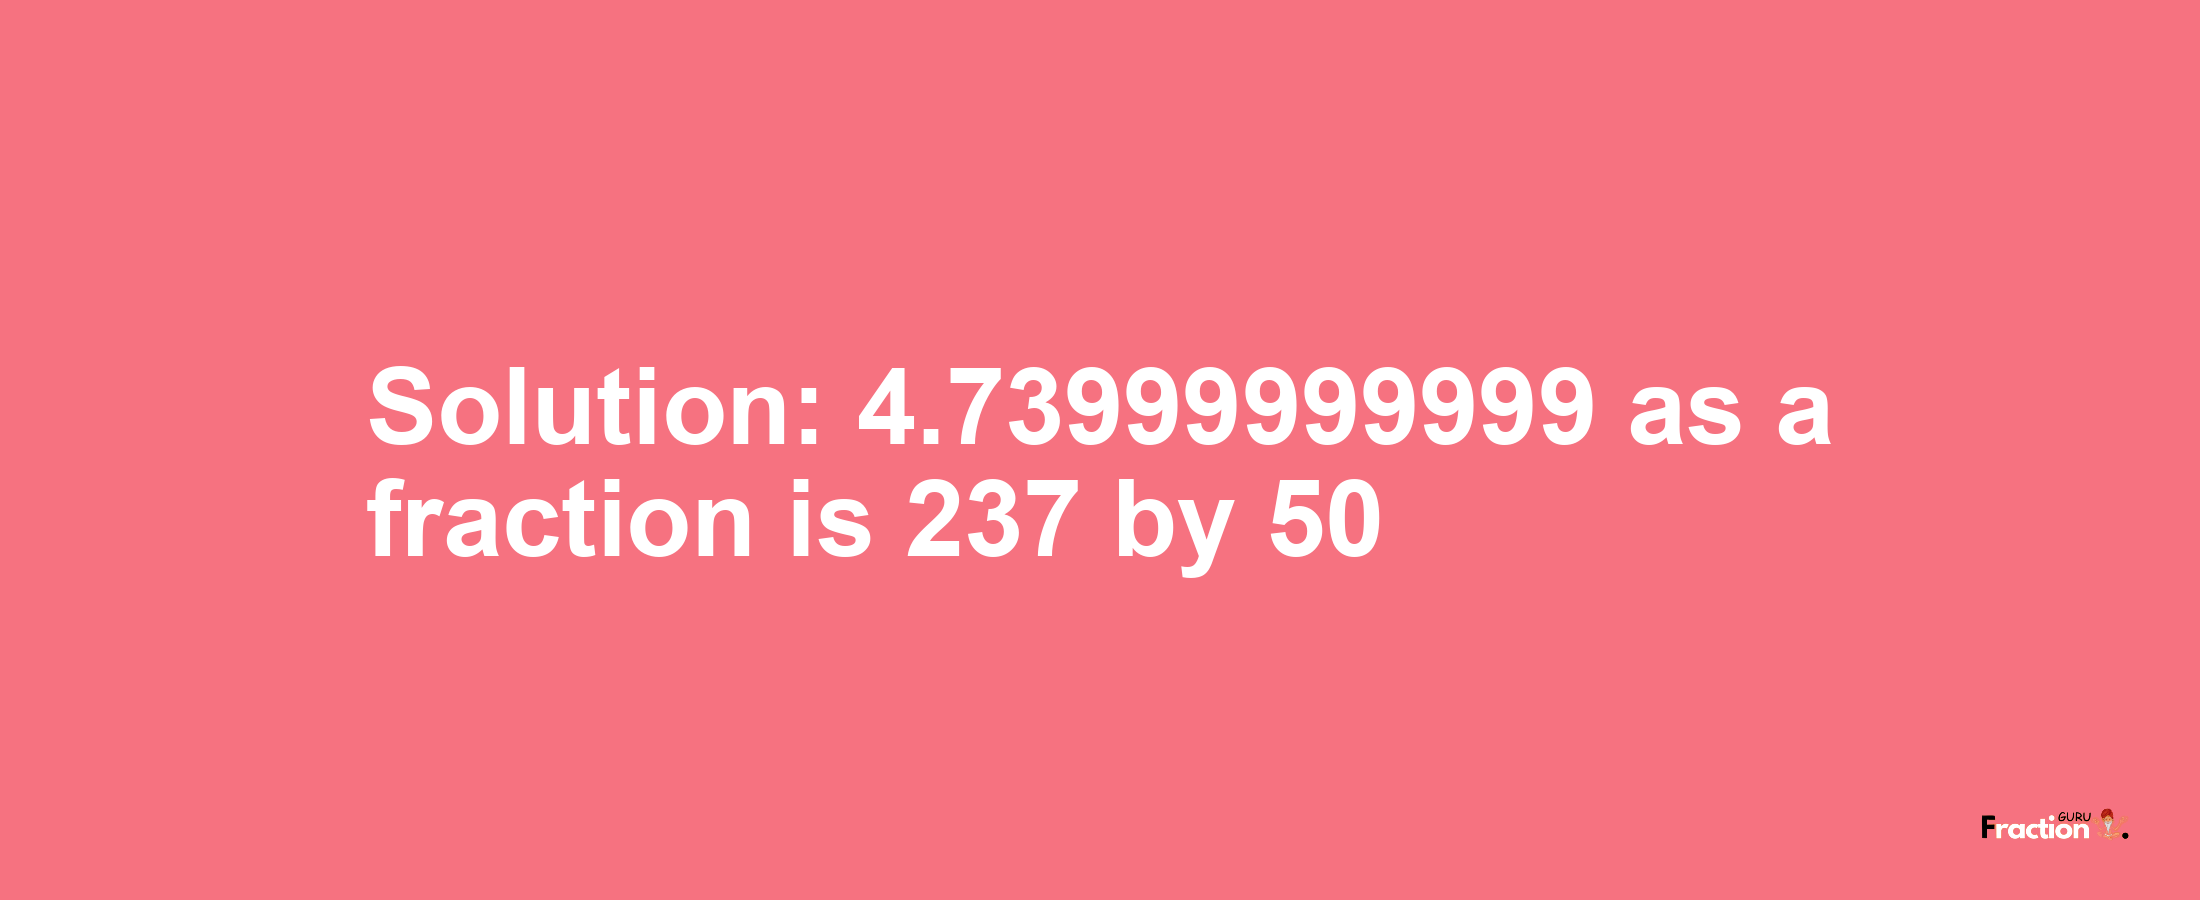 Solution:4.73999999999 as a fraction is 237/50